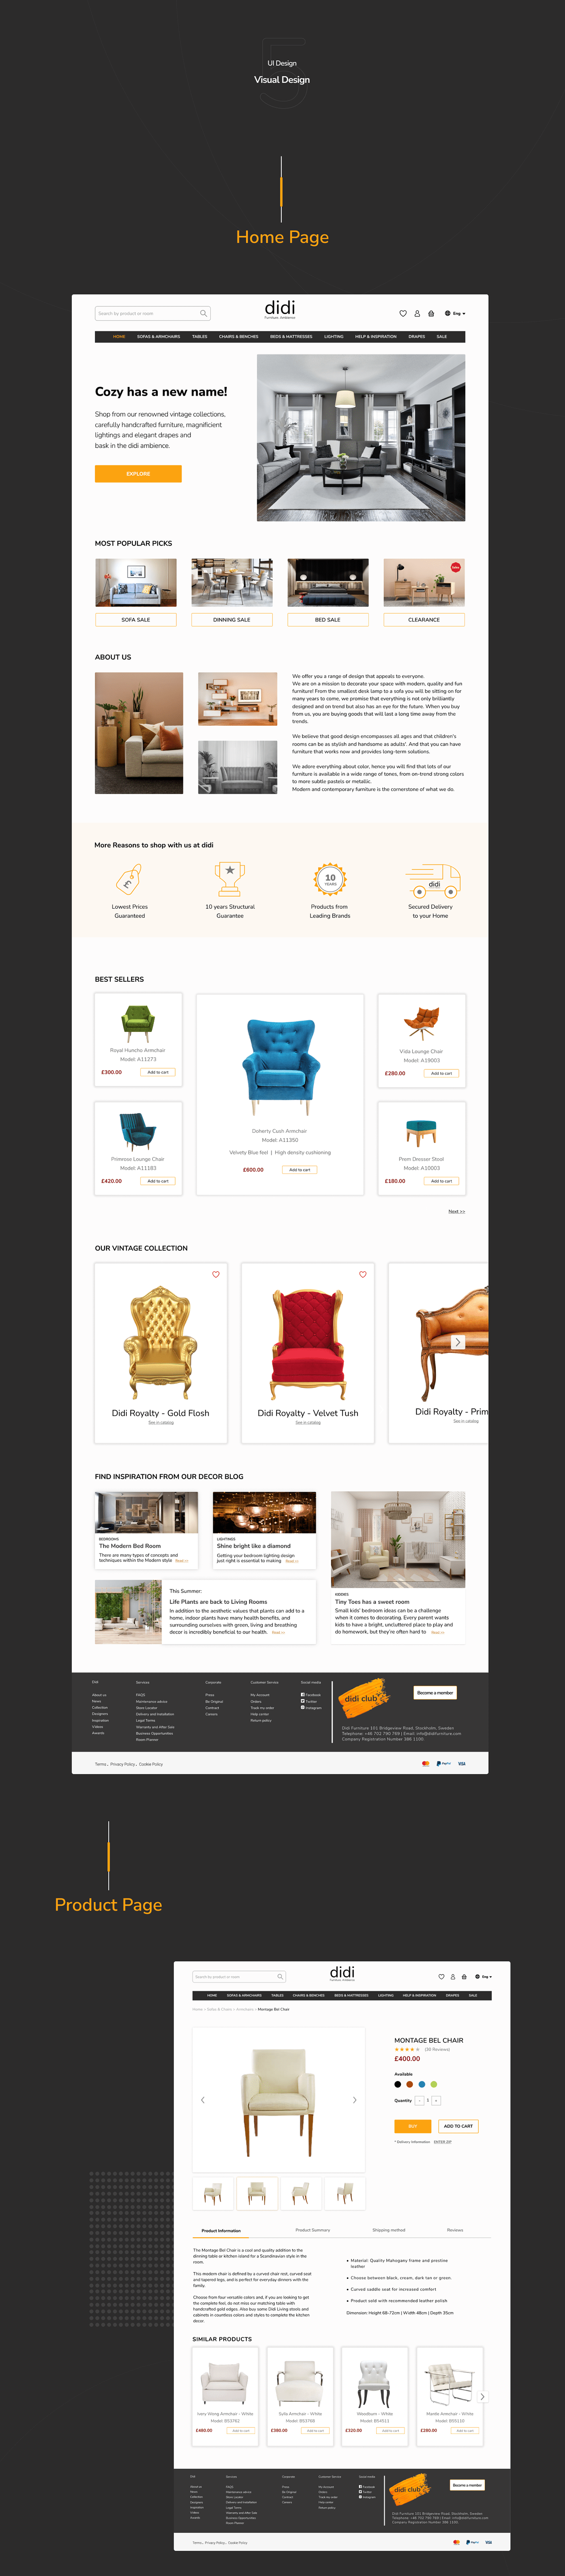 The product page shows the selected item in different angles, with product color options.